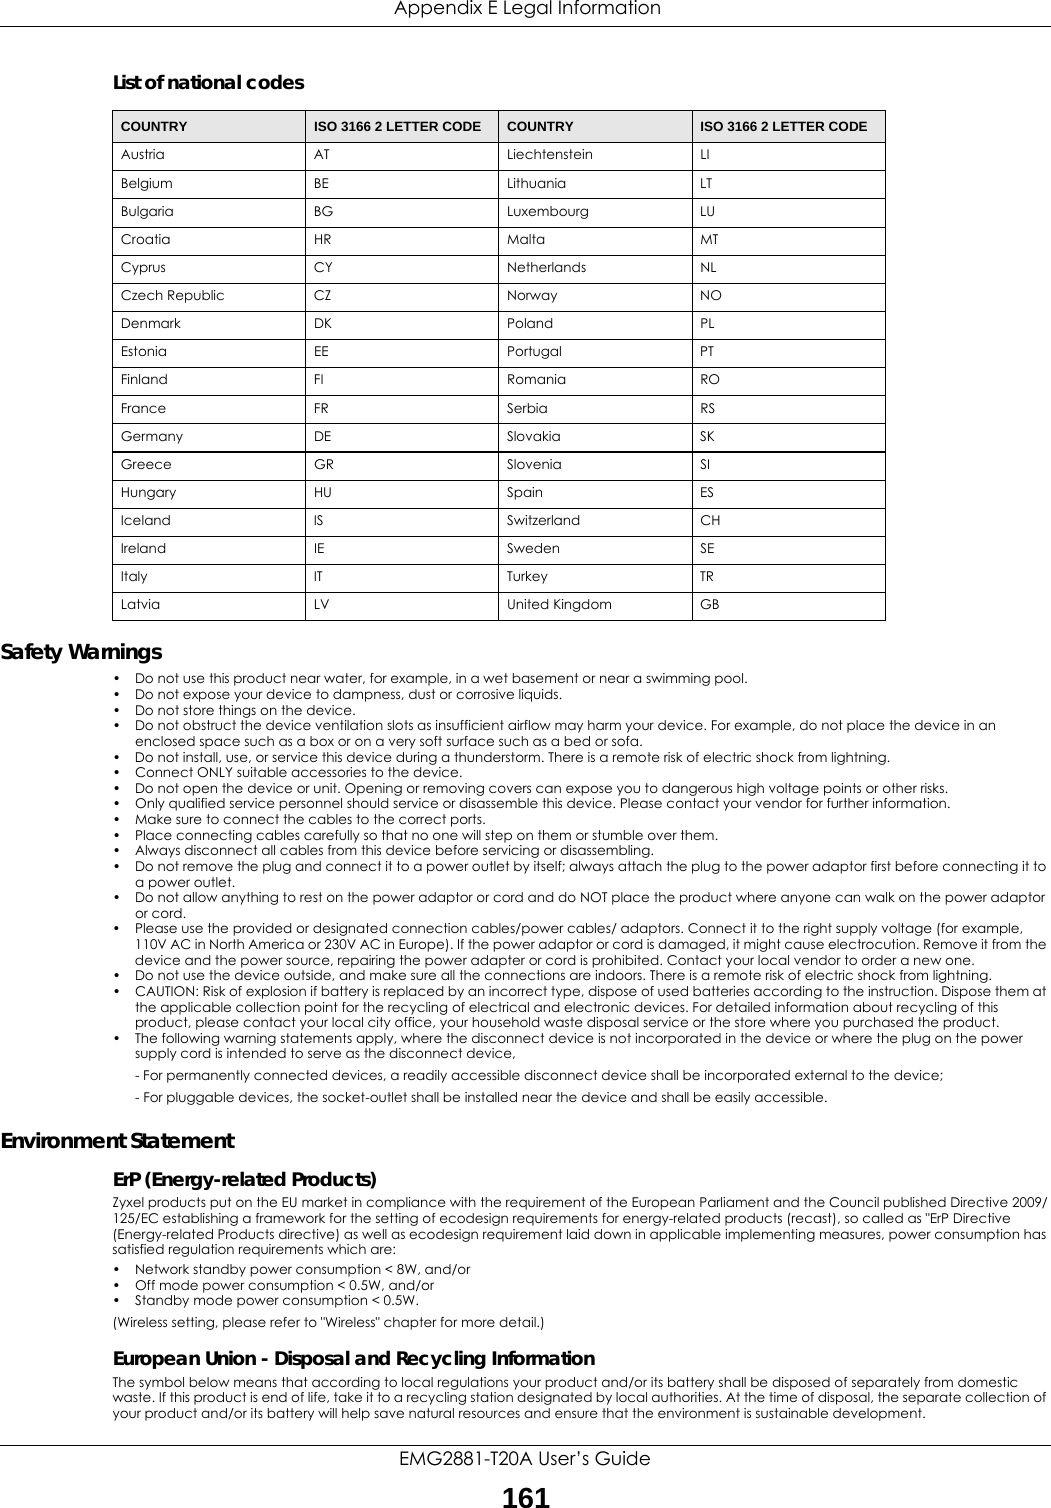  Appendix E Legal InformationEMG2881-T20A User’s Guide161List of national codesSafety Warnings• Do not use this product near water, for example, in a wet basement or near a swimming pool.• Do not expose your device to dampness, dust or corrosive liquids.• Do not store things on the device.• Do not obstruct the device ventilation slots as insufficient airflow may harm your device. For example, do not place the device in an enclosed space such as a box or on a very soft surface such as a bed or sofa.• Do not install, use, or service this device during a thunderstorm. There is a remote risk of electric shock from lightning.• Connect ONLY suitable accessories to the device.• Do not open the device or unit. Opening or removing covers can expose you to dangerous high voltage points or other risks. • Only qualified service personnel should service or disassemble this device. Please contact your vendor for further information.• Make sure to connect the cables to the correct ports.• Place connecting cables carefully so that no one will step on them or stumble over them.• Always disconnect all cables from this device before servicing or disassembling.• Do not remove the plug and connect it to a power outlet by itself; always attach the plug to the power adaptor first before connecting it to a power outlet.• Do not allow anything to rest on the power adaptor or cord and do NOT place the product where anyone can walk on the power adaptor or cord.• Please use the provided or designated connection cables/power cables/ adaptors. Connect it to the right supply voltage (for example, 110V AC in North America or 230V AC in Europe). If the power adaptor or cord is damaged, it might cause electrocution. Remove it from the device and the power source, repairing the power adapter or cord is prohibited. Contact your local vendor to order a new one.• Do not use the device outside, and make sure all the connections are indoors. There is a remote risk of electric shock from lightning.• CAUTION: Risk of explosion if battery is replaced by an incorrect type, dispose of used batteries according to the instruction. Dispose them at the applicable collection point for the recycling of electrical and electronic devices. For detailed information about recycling of this product, please contact your local city office, your household waste disposal service or the store where you purchased the product.• The following warning statements apply, where the disconnect device is not incorporated in the device or where the plug on the power supply cord is intended to serve as the disconnect device,- For permanently connected devices, a readily accessible disconnect device shall be incorporated external to the device;- For pluggable devices, the socket-outlet shall be installed near the device and shall be easily accessible.Environment StatementErP (Energy-related Products) Zyxel products put on the EU market in compliance with the requirement of the European Parliament and the Council published Directive 2009/125/EC establishing a framework for the setting of ecodesign requirements for energy-related products (recast), so called as &quot;ErP Directive (Energy-related Products directive) as well as ecodesign requirement laid down in applicable implementing measures, power consumption has satisfied regulation requirements which are:• Network standby power consumption &lt; 8W, and/or• Off mode power consumption &lt; 0.5W, and/or• Standby mode power consumption &lt; 0.5W.(Wireless setting, please refer to &quot;Wireless&quot; chapter for more detail.)European Union - Disposal and Recycling InformationThe symbol below means that according to local regulations your product and/or its battery shall be disposed of separately from domestic waste. If this product is end of life, take it to a recycling station designated by local authorities. At the time of disposal, the separate collection of your product and/or its battery will help save natural resources and ensure that the environment is sustainable development.COUNTRY ISO 3166 2 LETTER CODE COUNTRY ISO 3166 2 LETTER CODEAustria AT Liechtenstein LIBelgium BE Lithuania LTBulgaria BG Luxembourg LUCroatia HR Malta MTCyprus CY Netherlands NLCzech Republic CZ Norway NODenmark DK Poland PLEstonia EE Portugal PTFinland FI Romania ROFrance FR Serbia RSGermany DE Slovakia SKGreece GR Slovenia SIHungary HU Spain ESIceland IS Switzerland CHIreland IE Sweden SEItaly IT Turkey TRLatvia LV United Kingdom GB